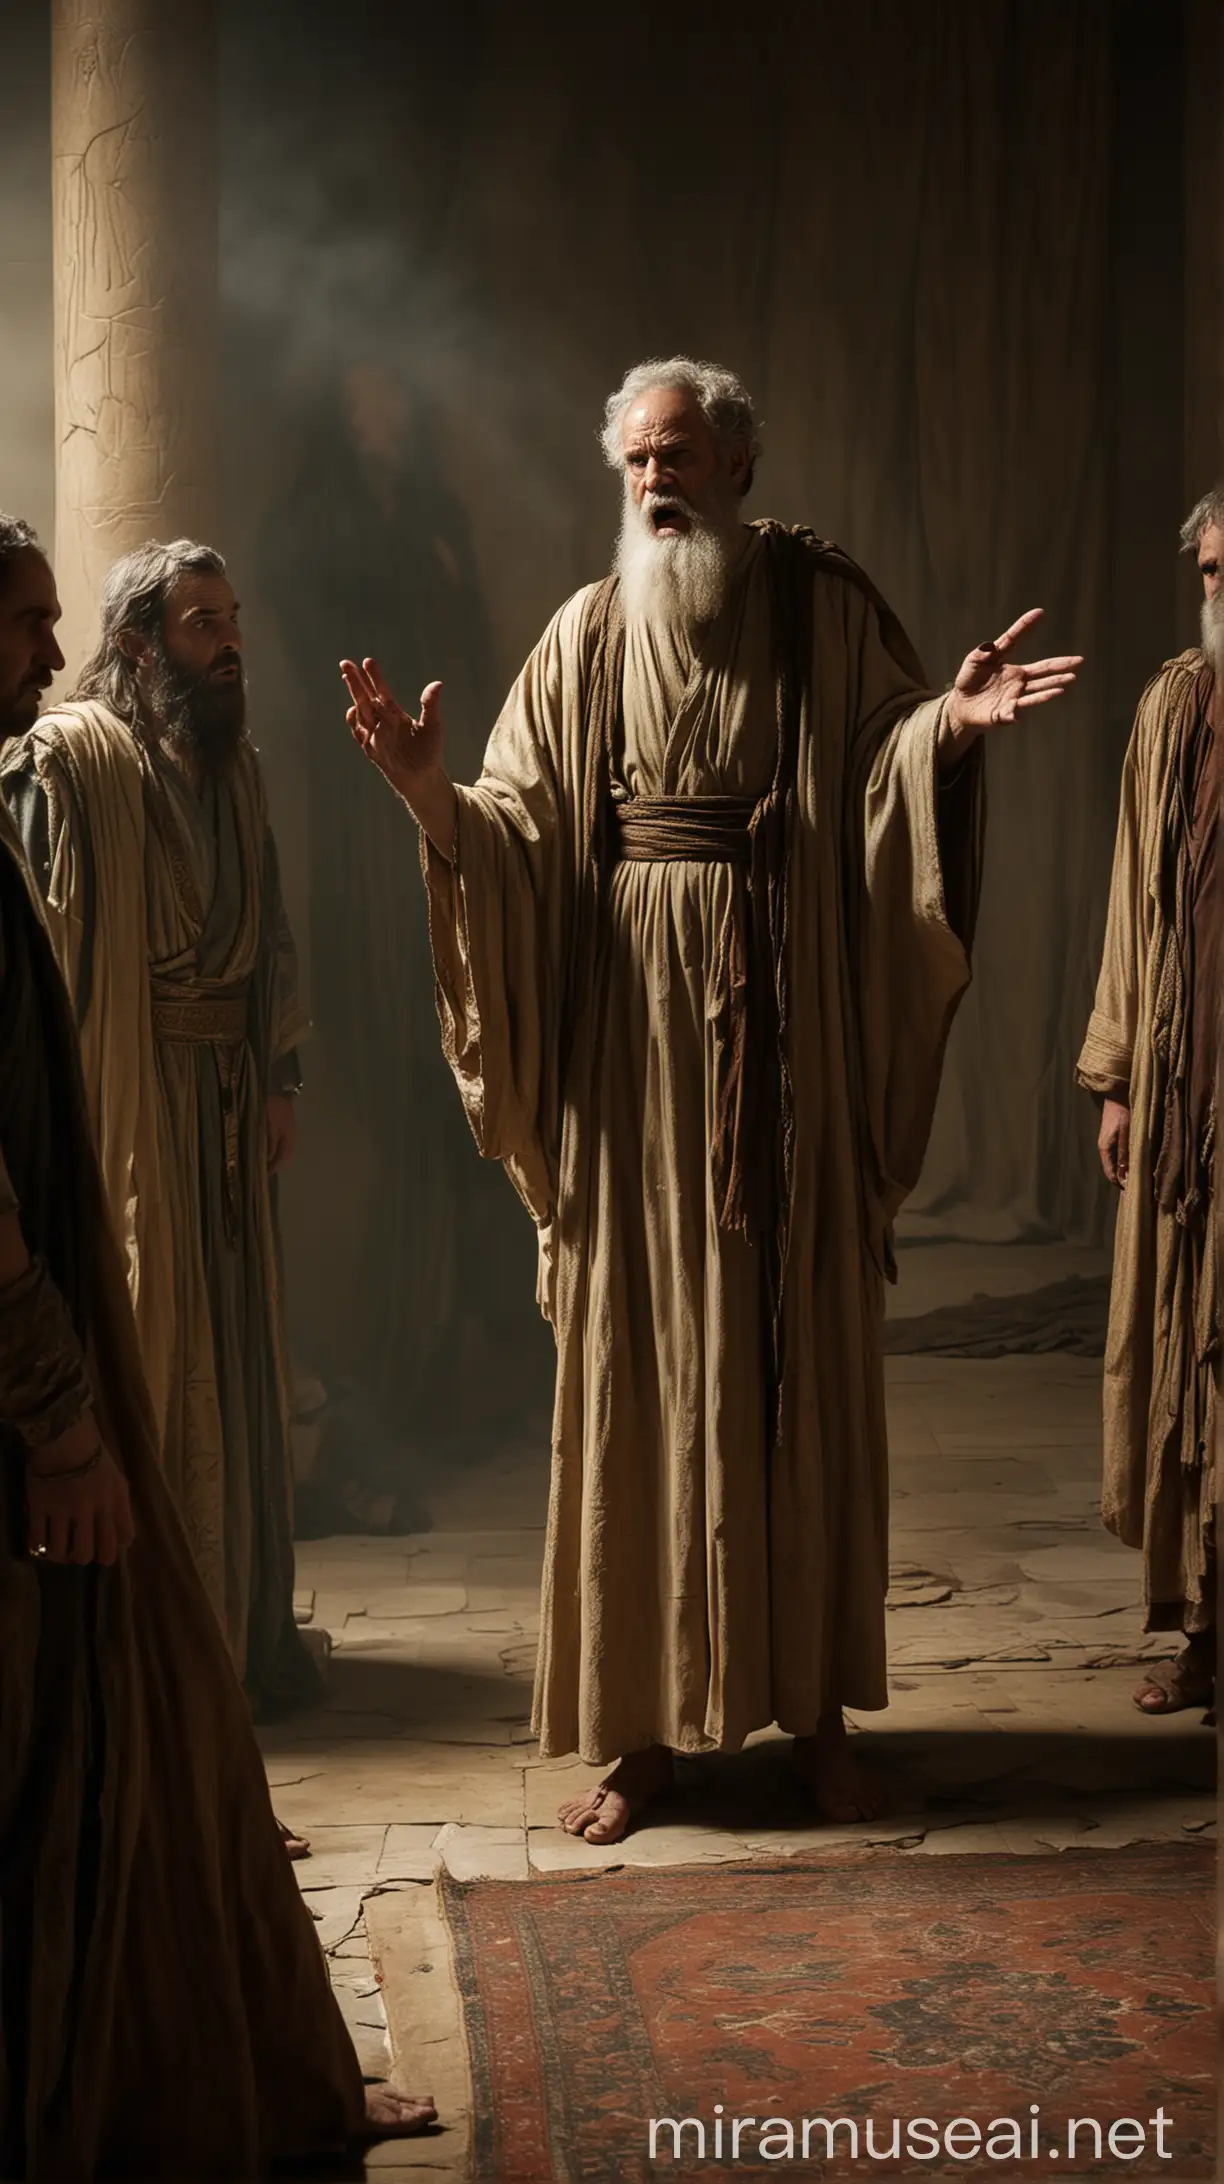 Inside a dimly lit room, Prophet Jeremiah stands before the angry officials. The officials are depicted in authoritative robes, showing expressions of anger and disdain. Jeremiah looks worn but resolute."In ancient world 